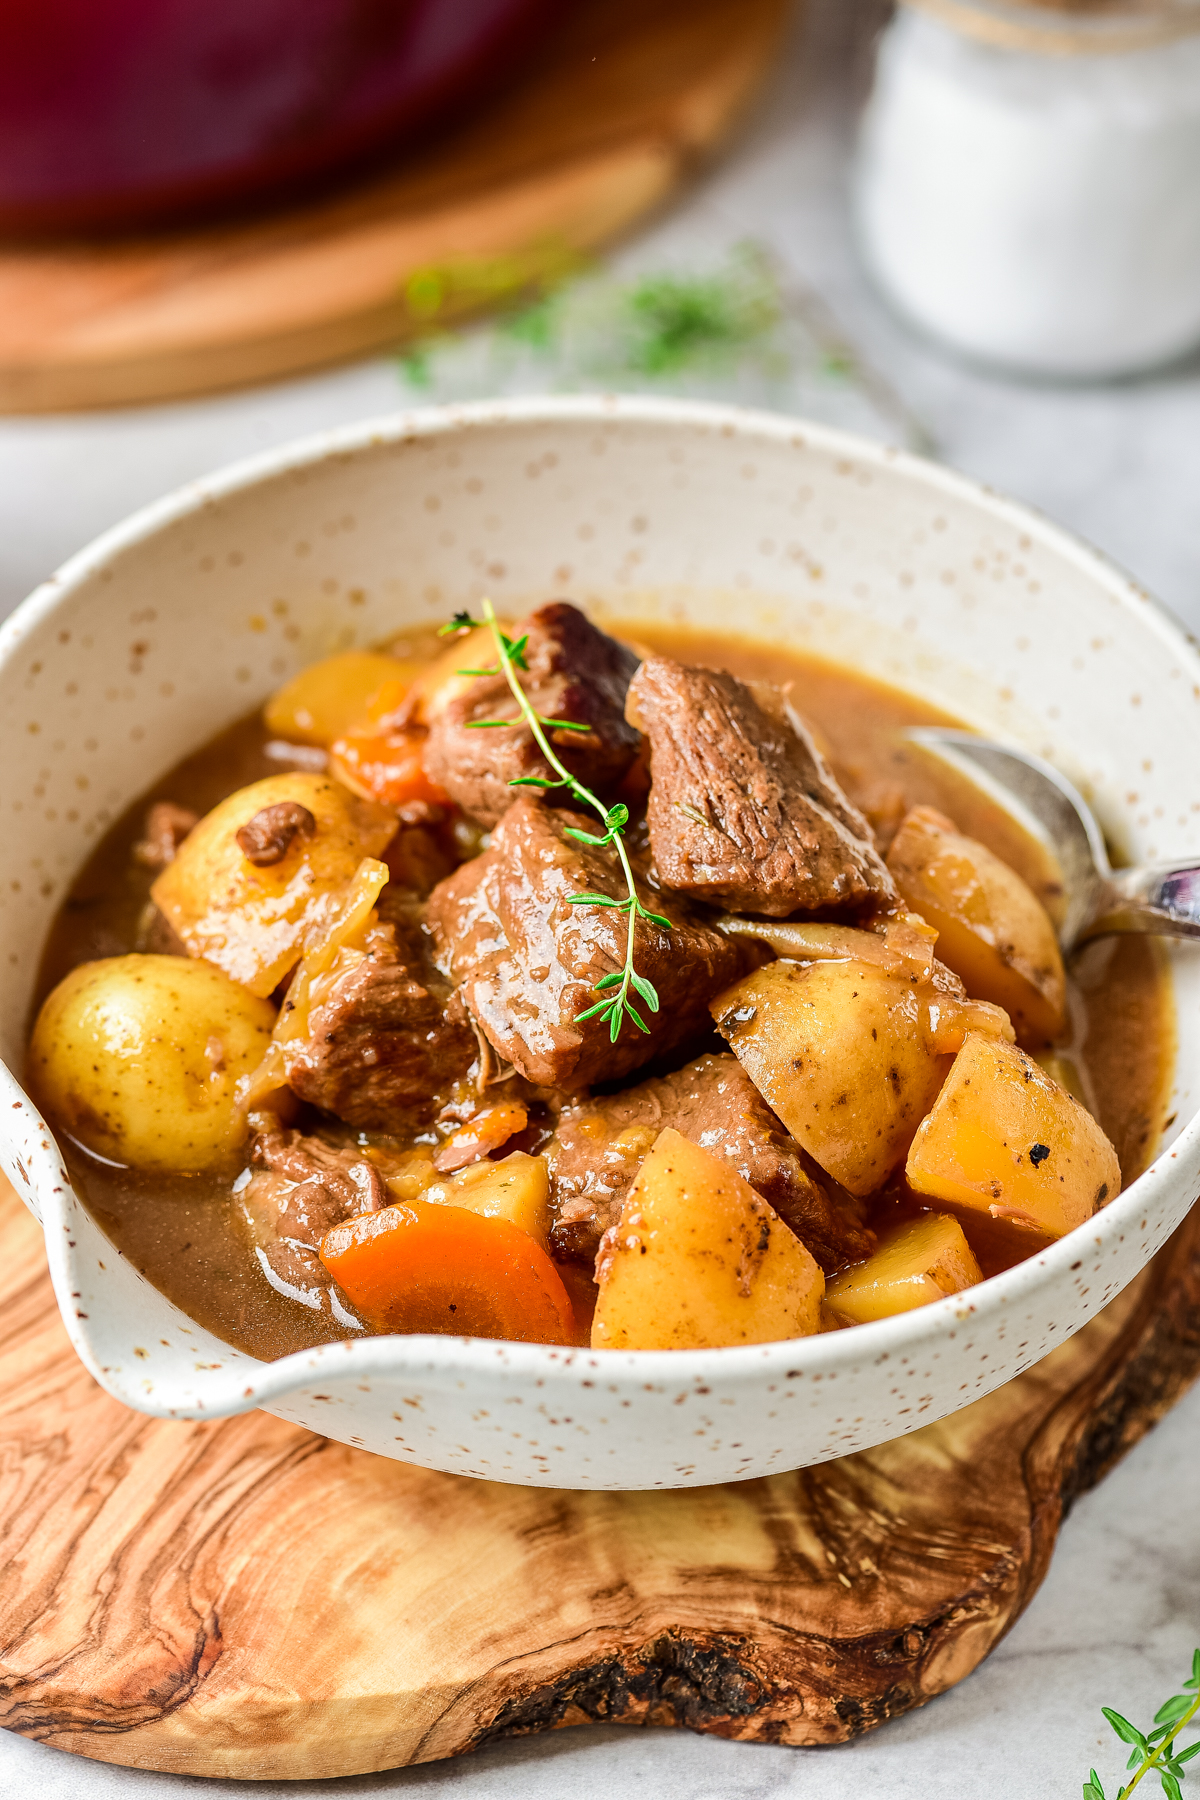 thyme, garlic cloves, bay leaf in beef stew with fresh vegetables